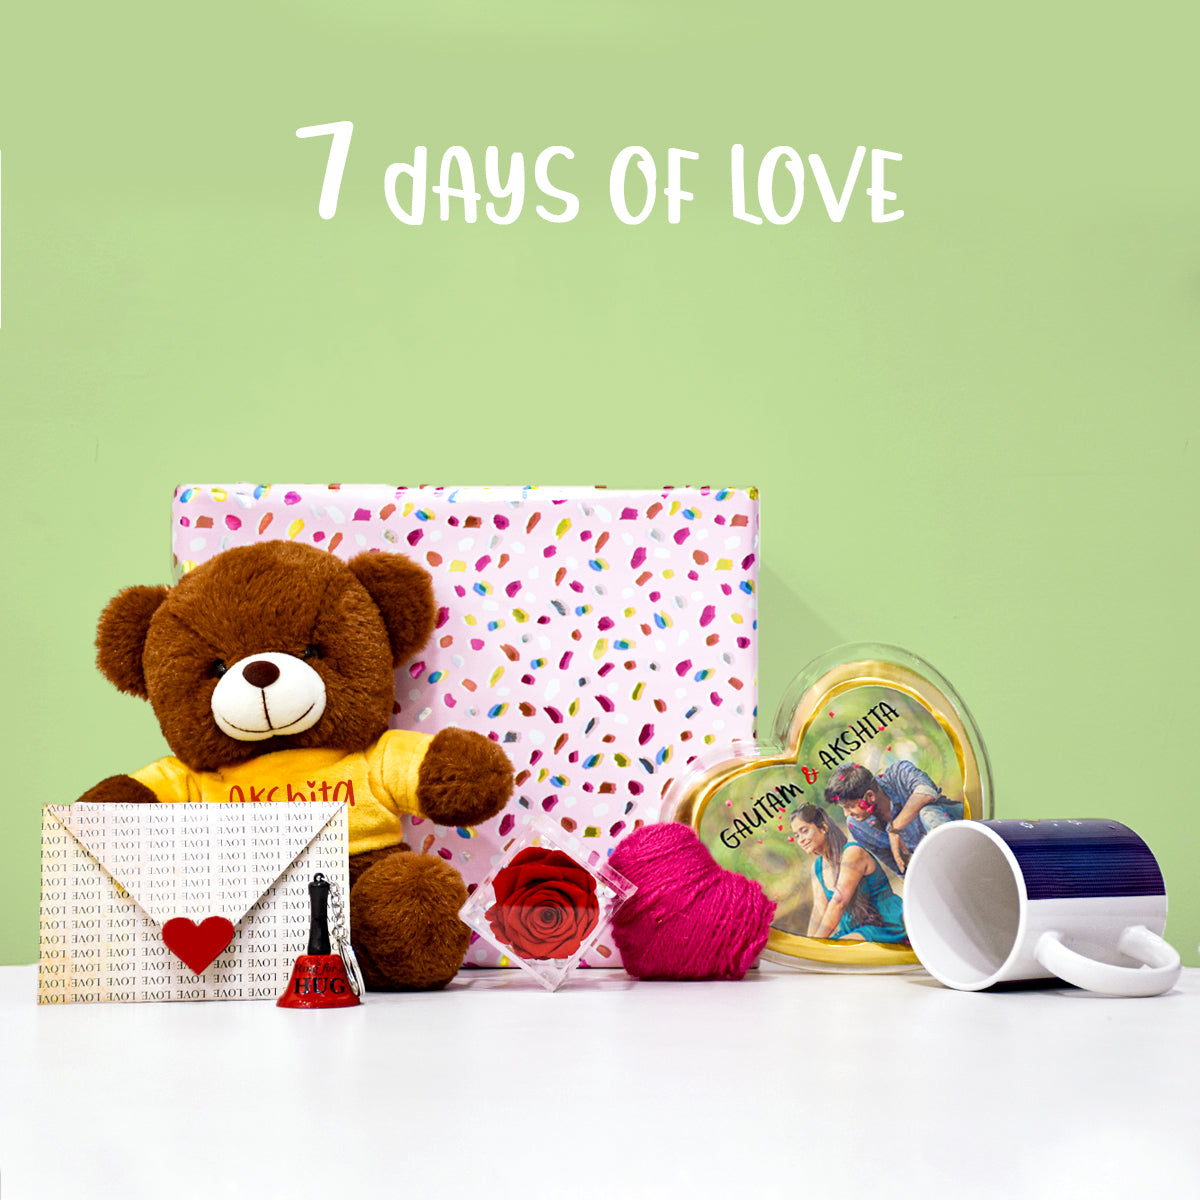 SURPRISE SOMEONE Valentine Heart Box with 20 Reasons I Love You Scrollers  with Hearts Attached | Gift Tags for Birthday/Anniversary/Boy Friend/ Girlfriend/Valentine/Wife/Husband : Amazon.in: Office Products